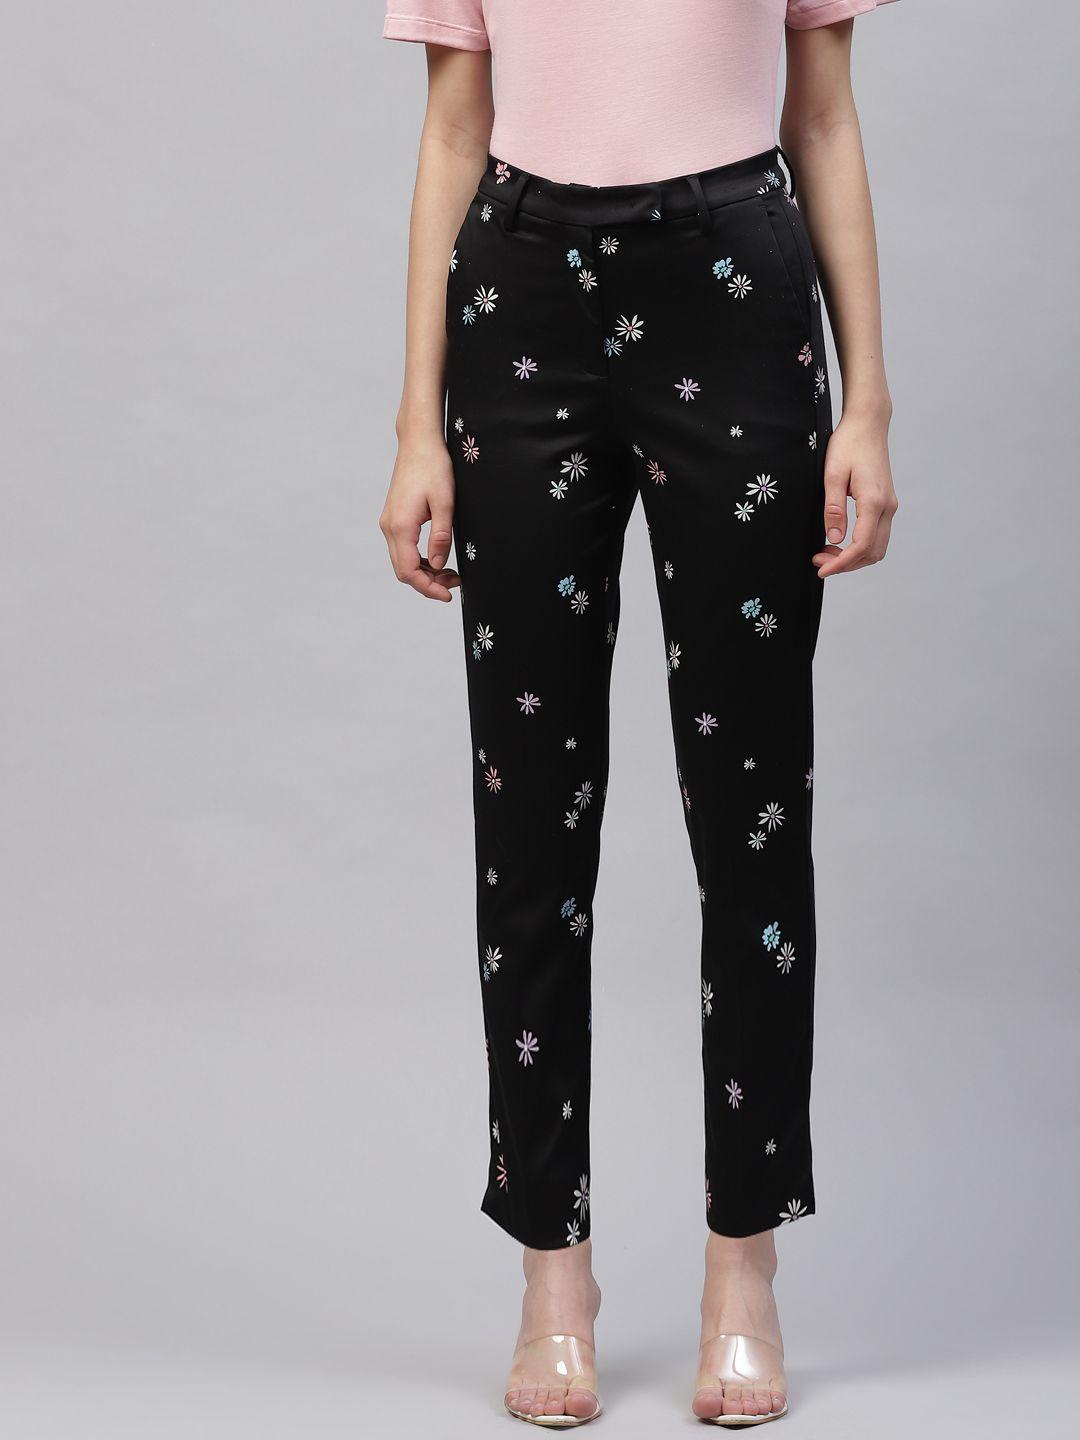 marks & spencer women black & white floral print slim fit trousers